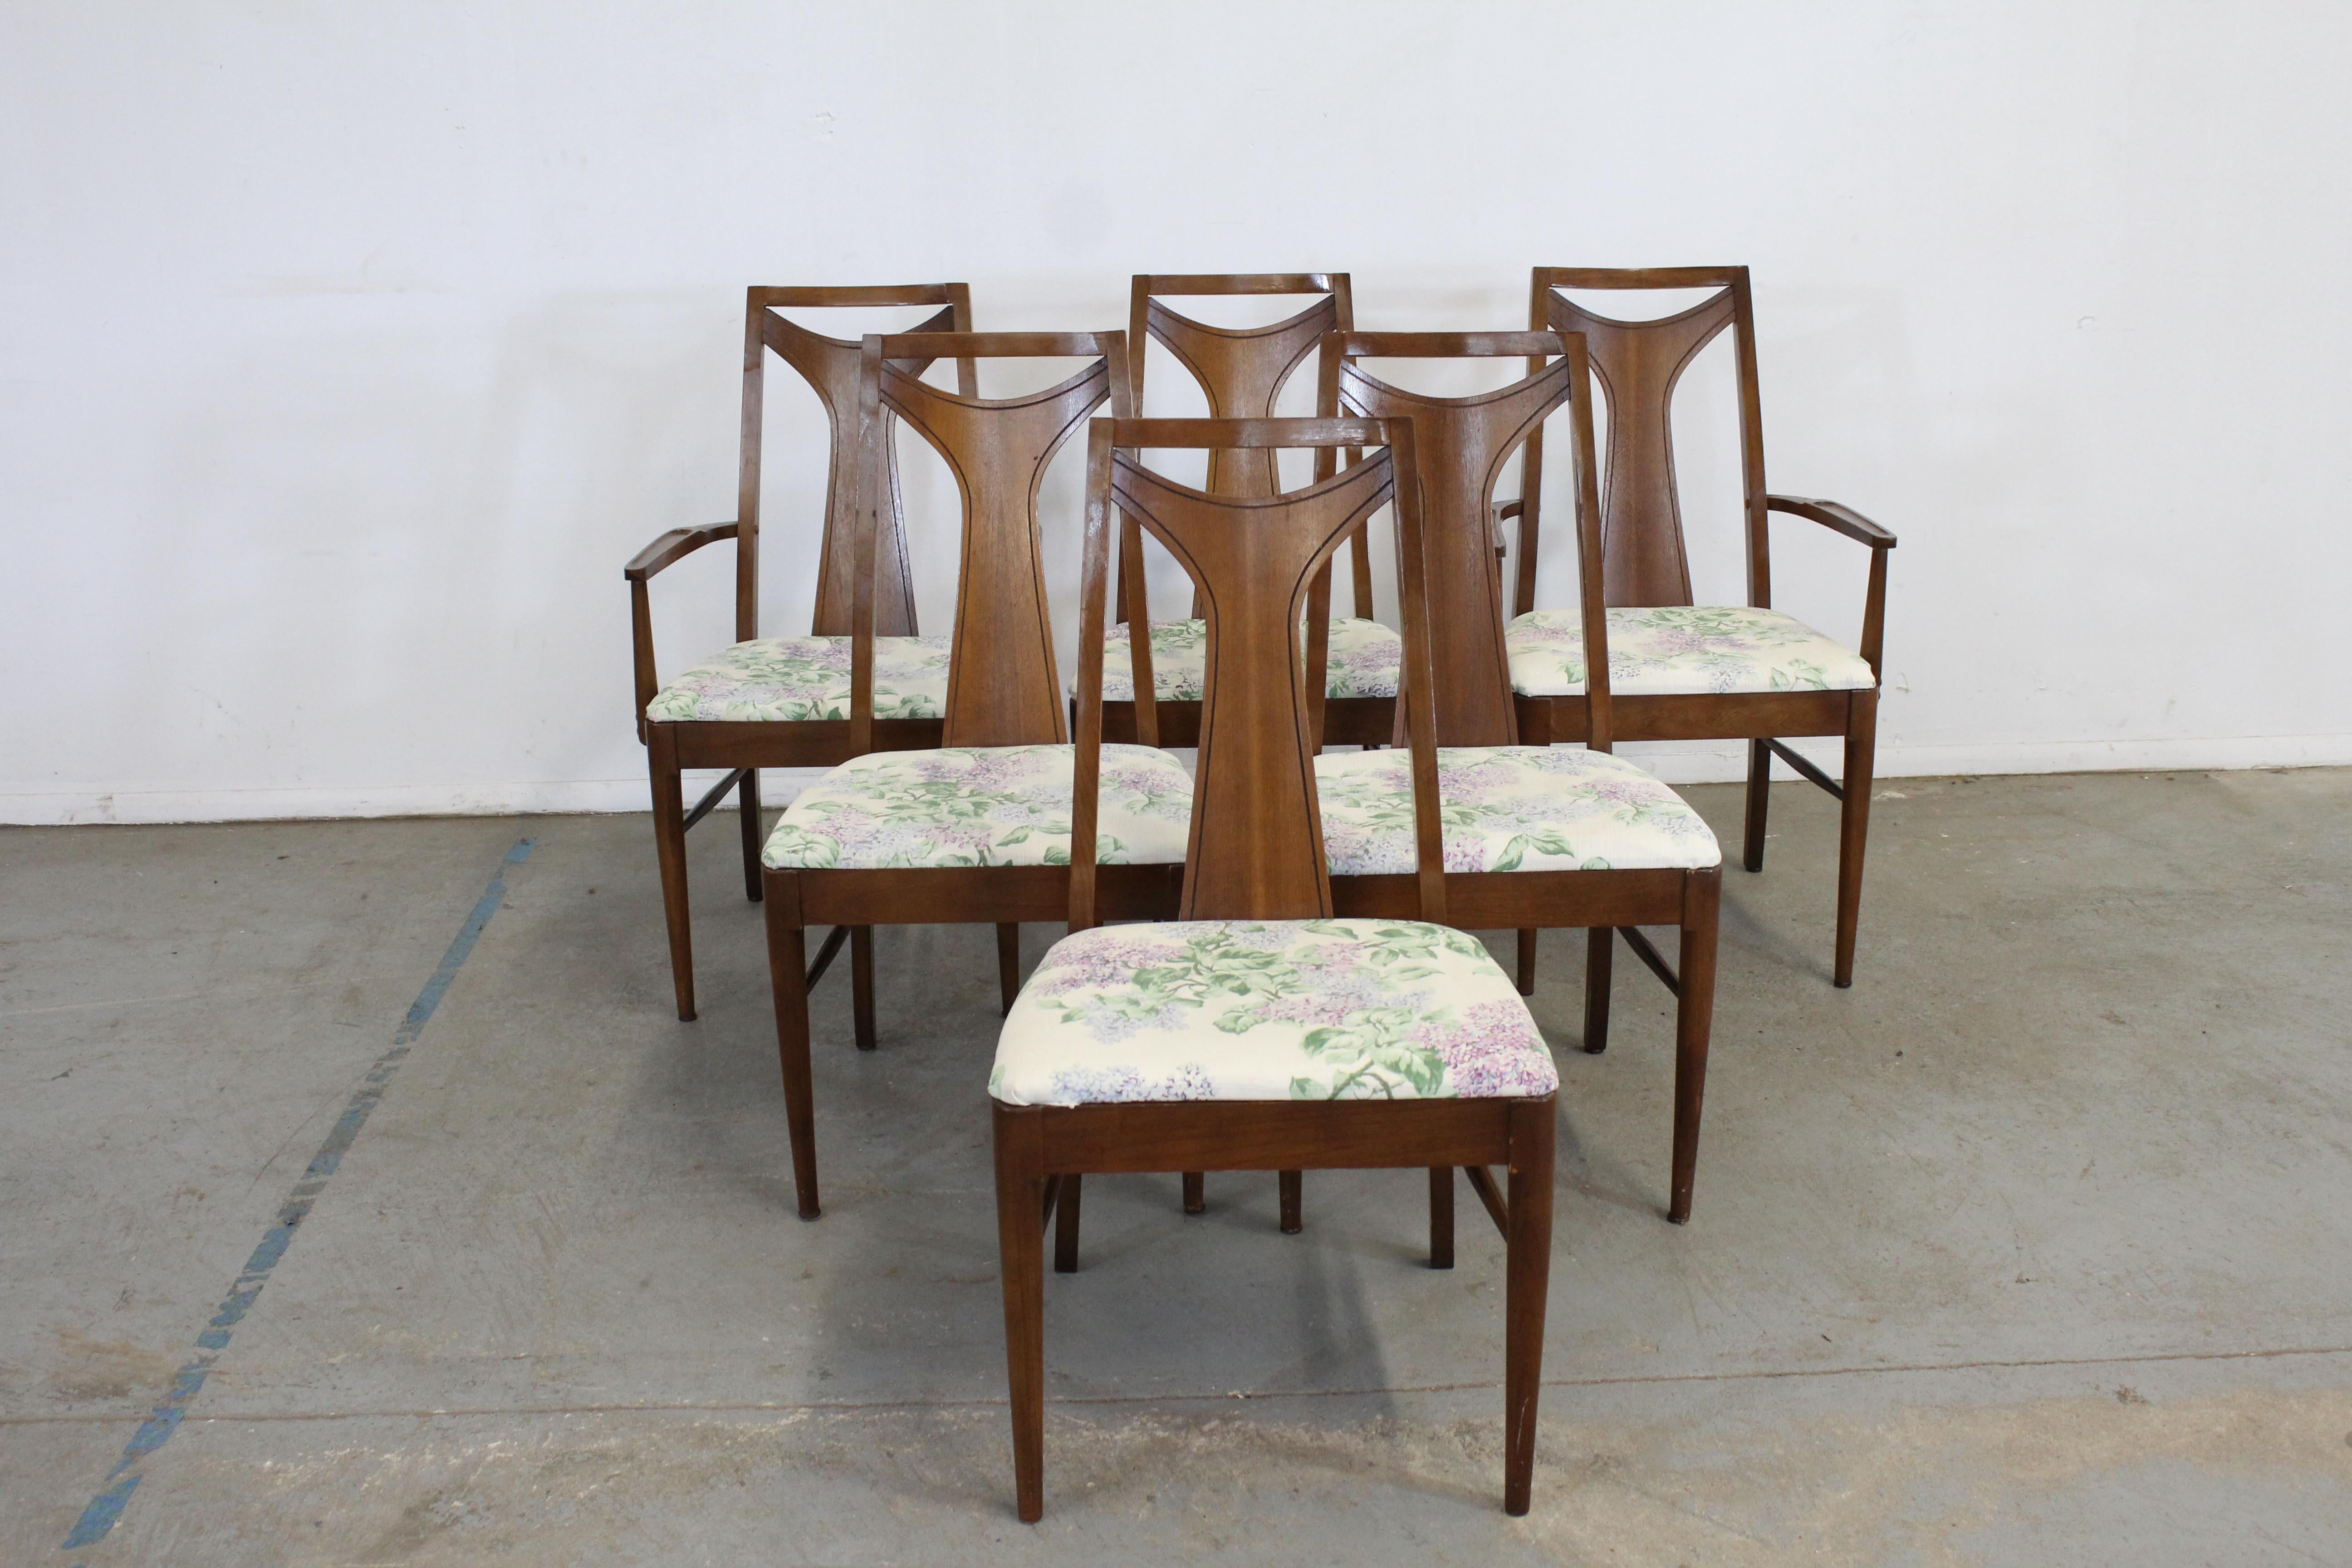 Set of 6 Mid-Century Modern Walnut kent Coffey dining chairs

Offered is a vintage set of 6 vintage dining chairs. They are in good structural condition but should be reupholstered. Shows surface scratches, age wear. They're not signed. Still a